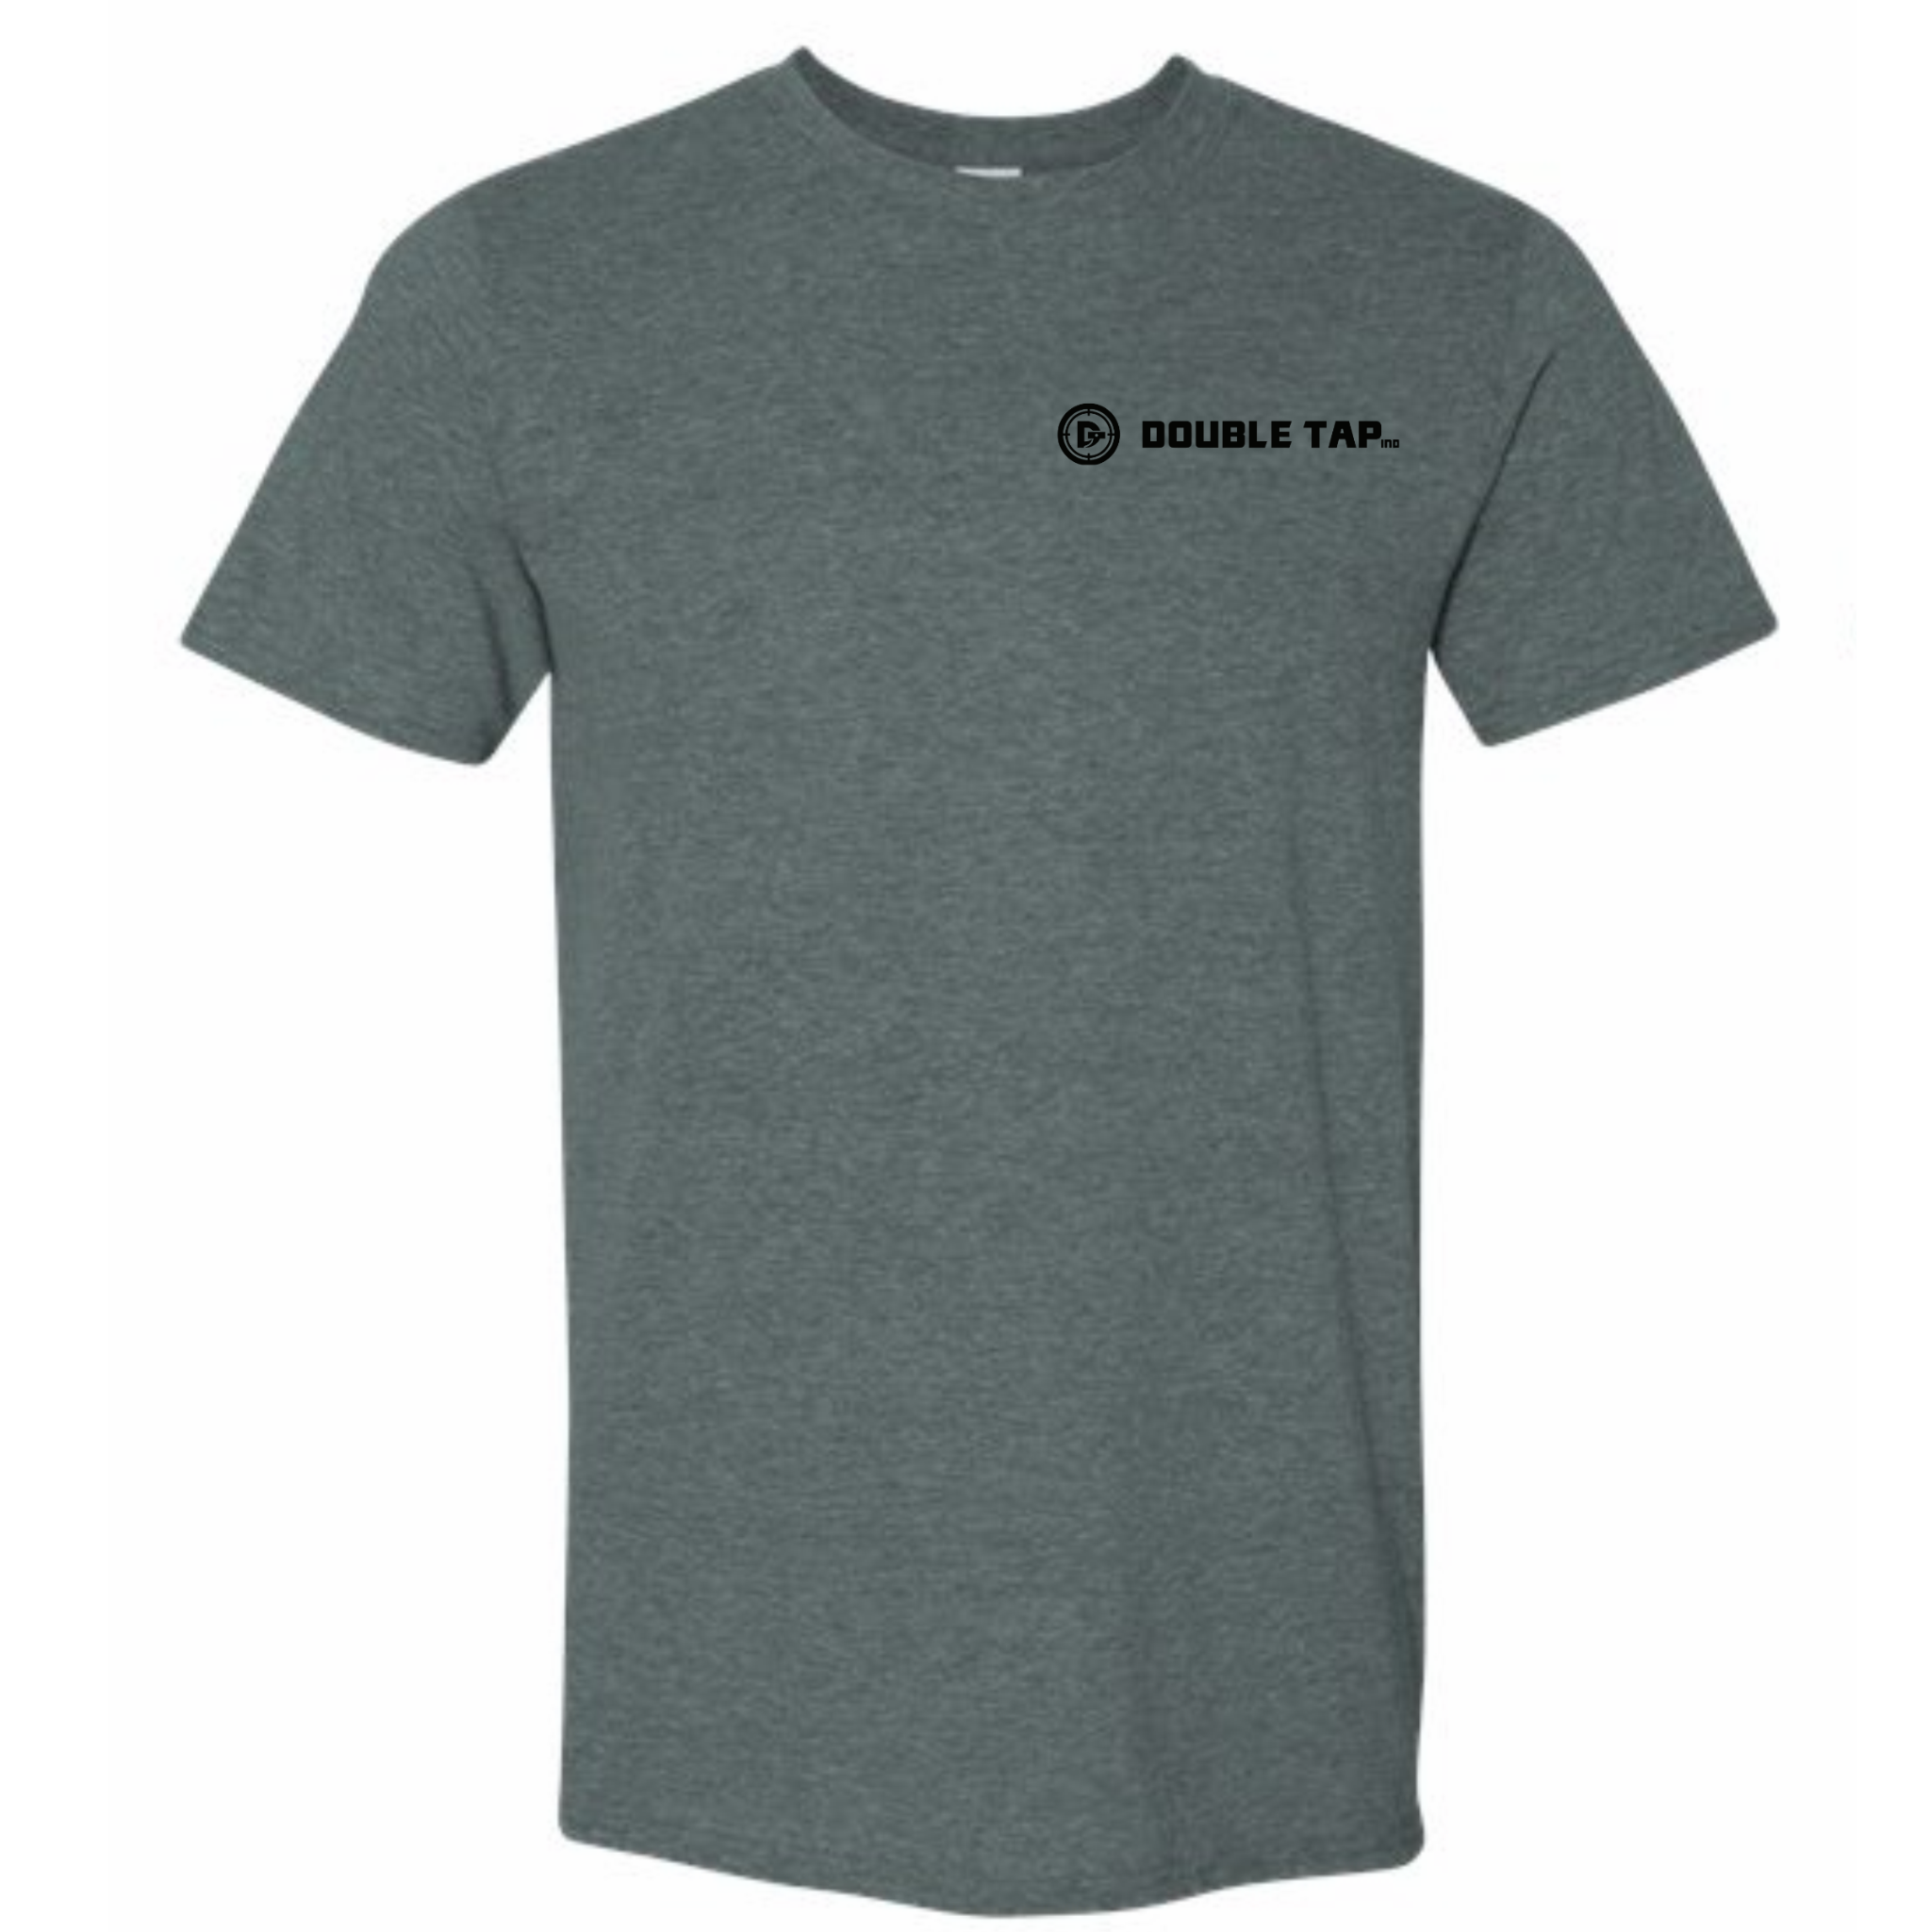 Double Tap Ind. T-Shirt - Heather Grey